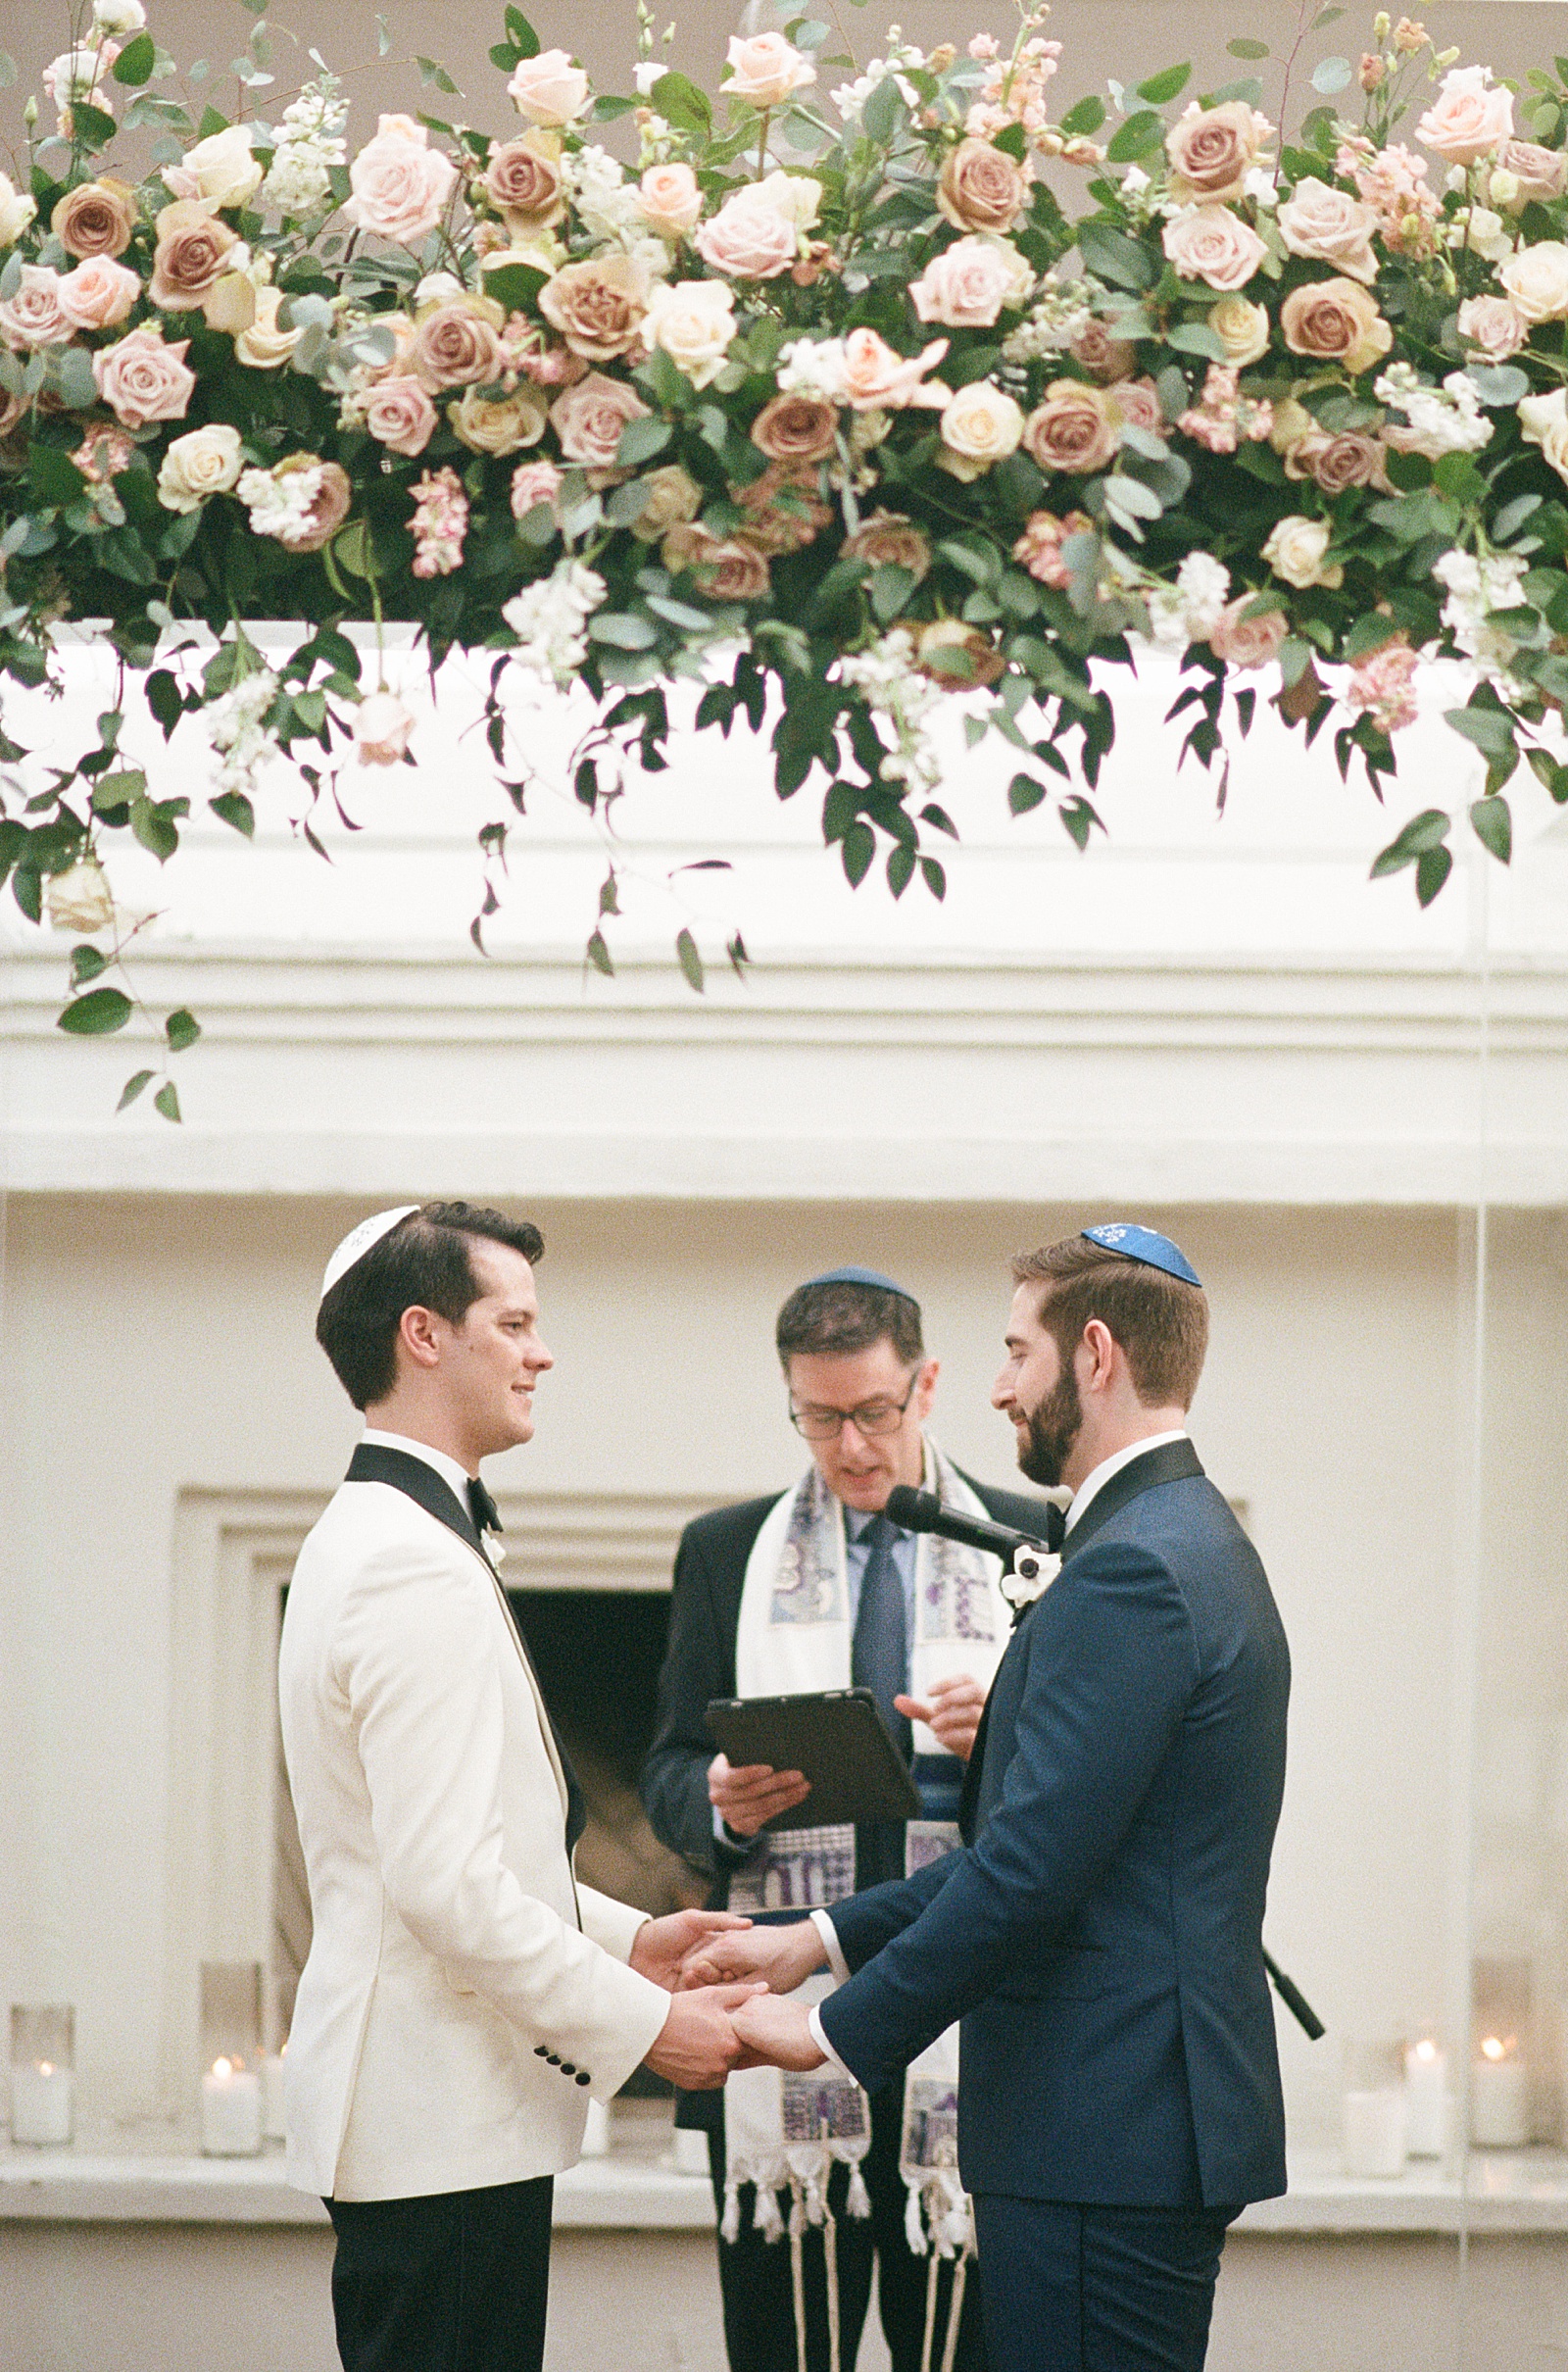 Two grooms hold hands under a floral chuppah during a Jewish wedding.